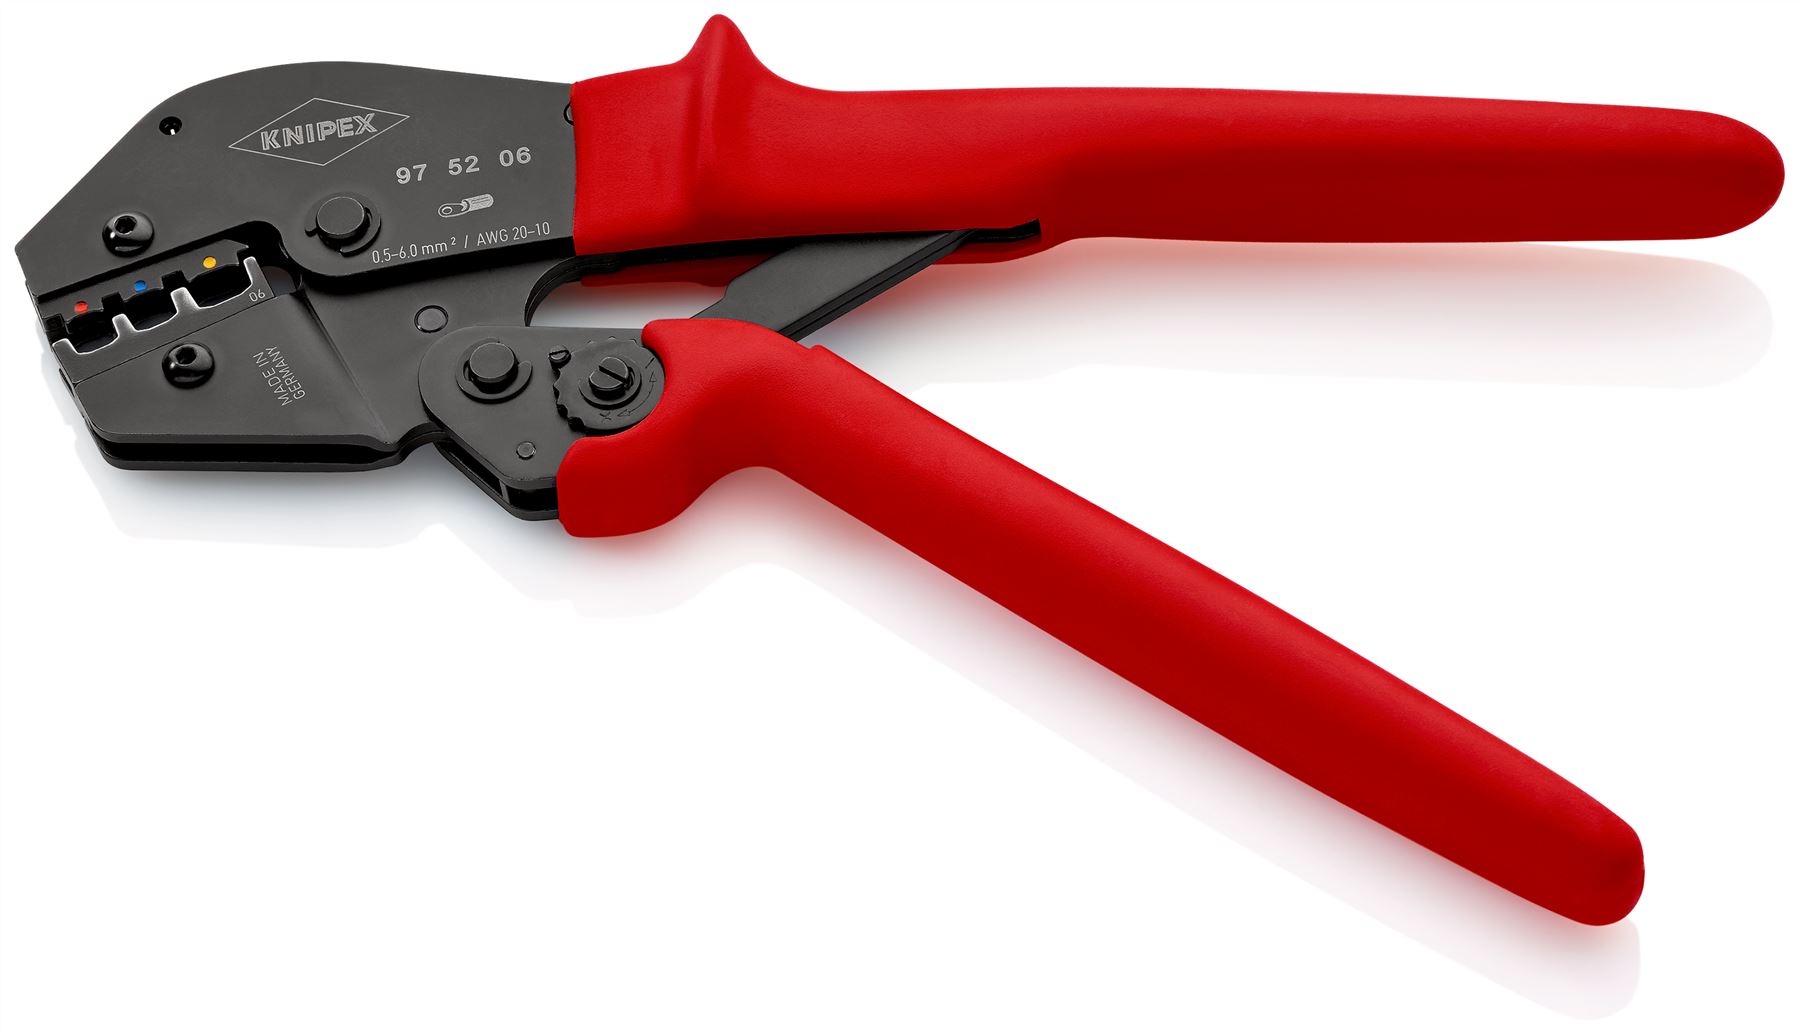 KNIPEX Crimping Pliers Two Hand Operation for Solder Free Electrical Connections 250mm 97 52 06